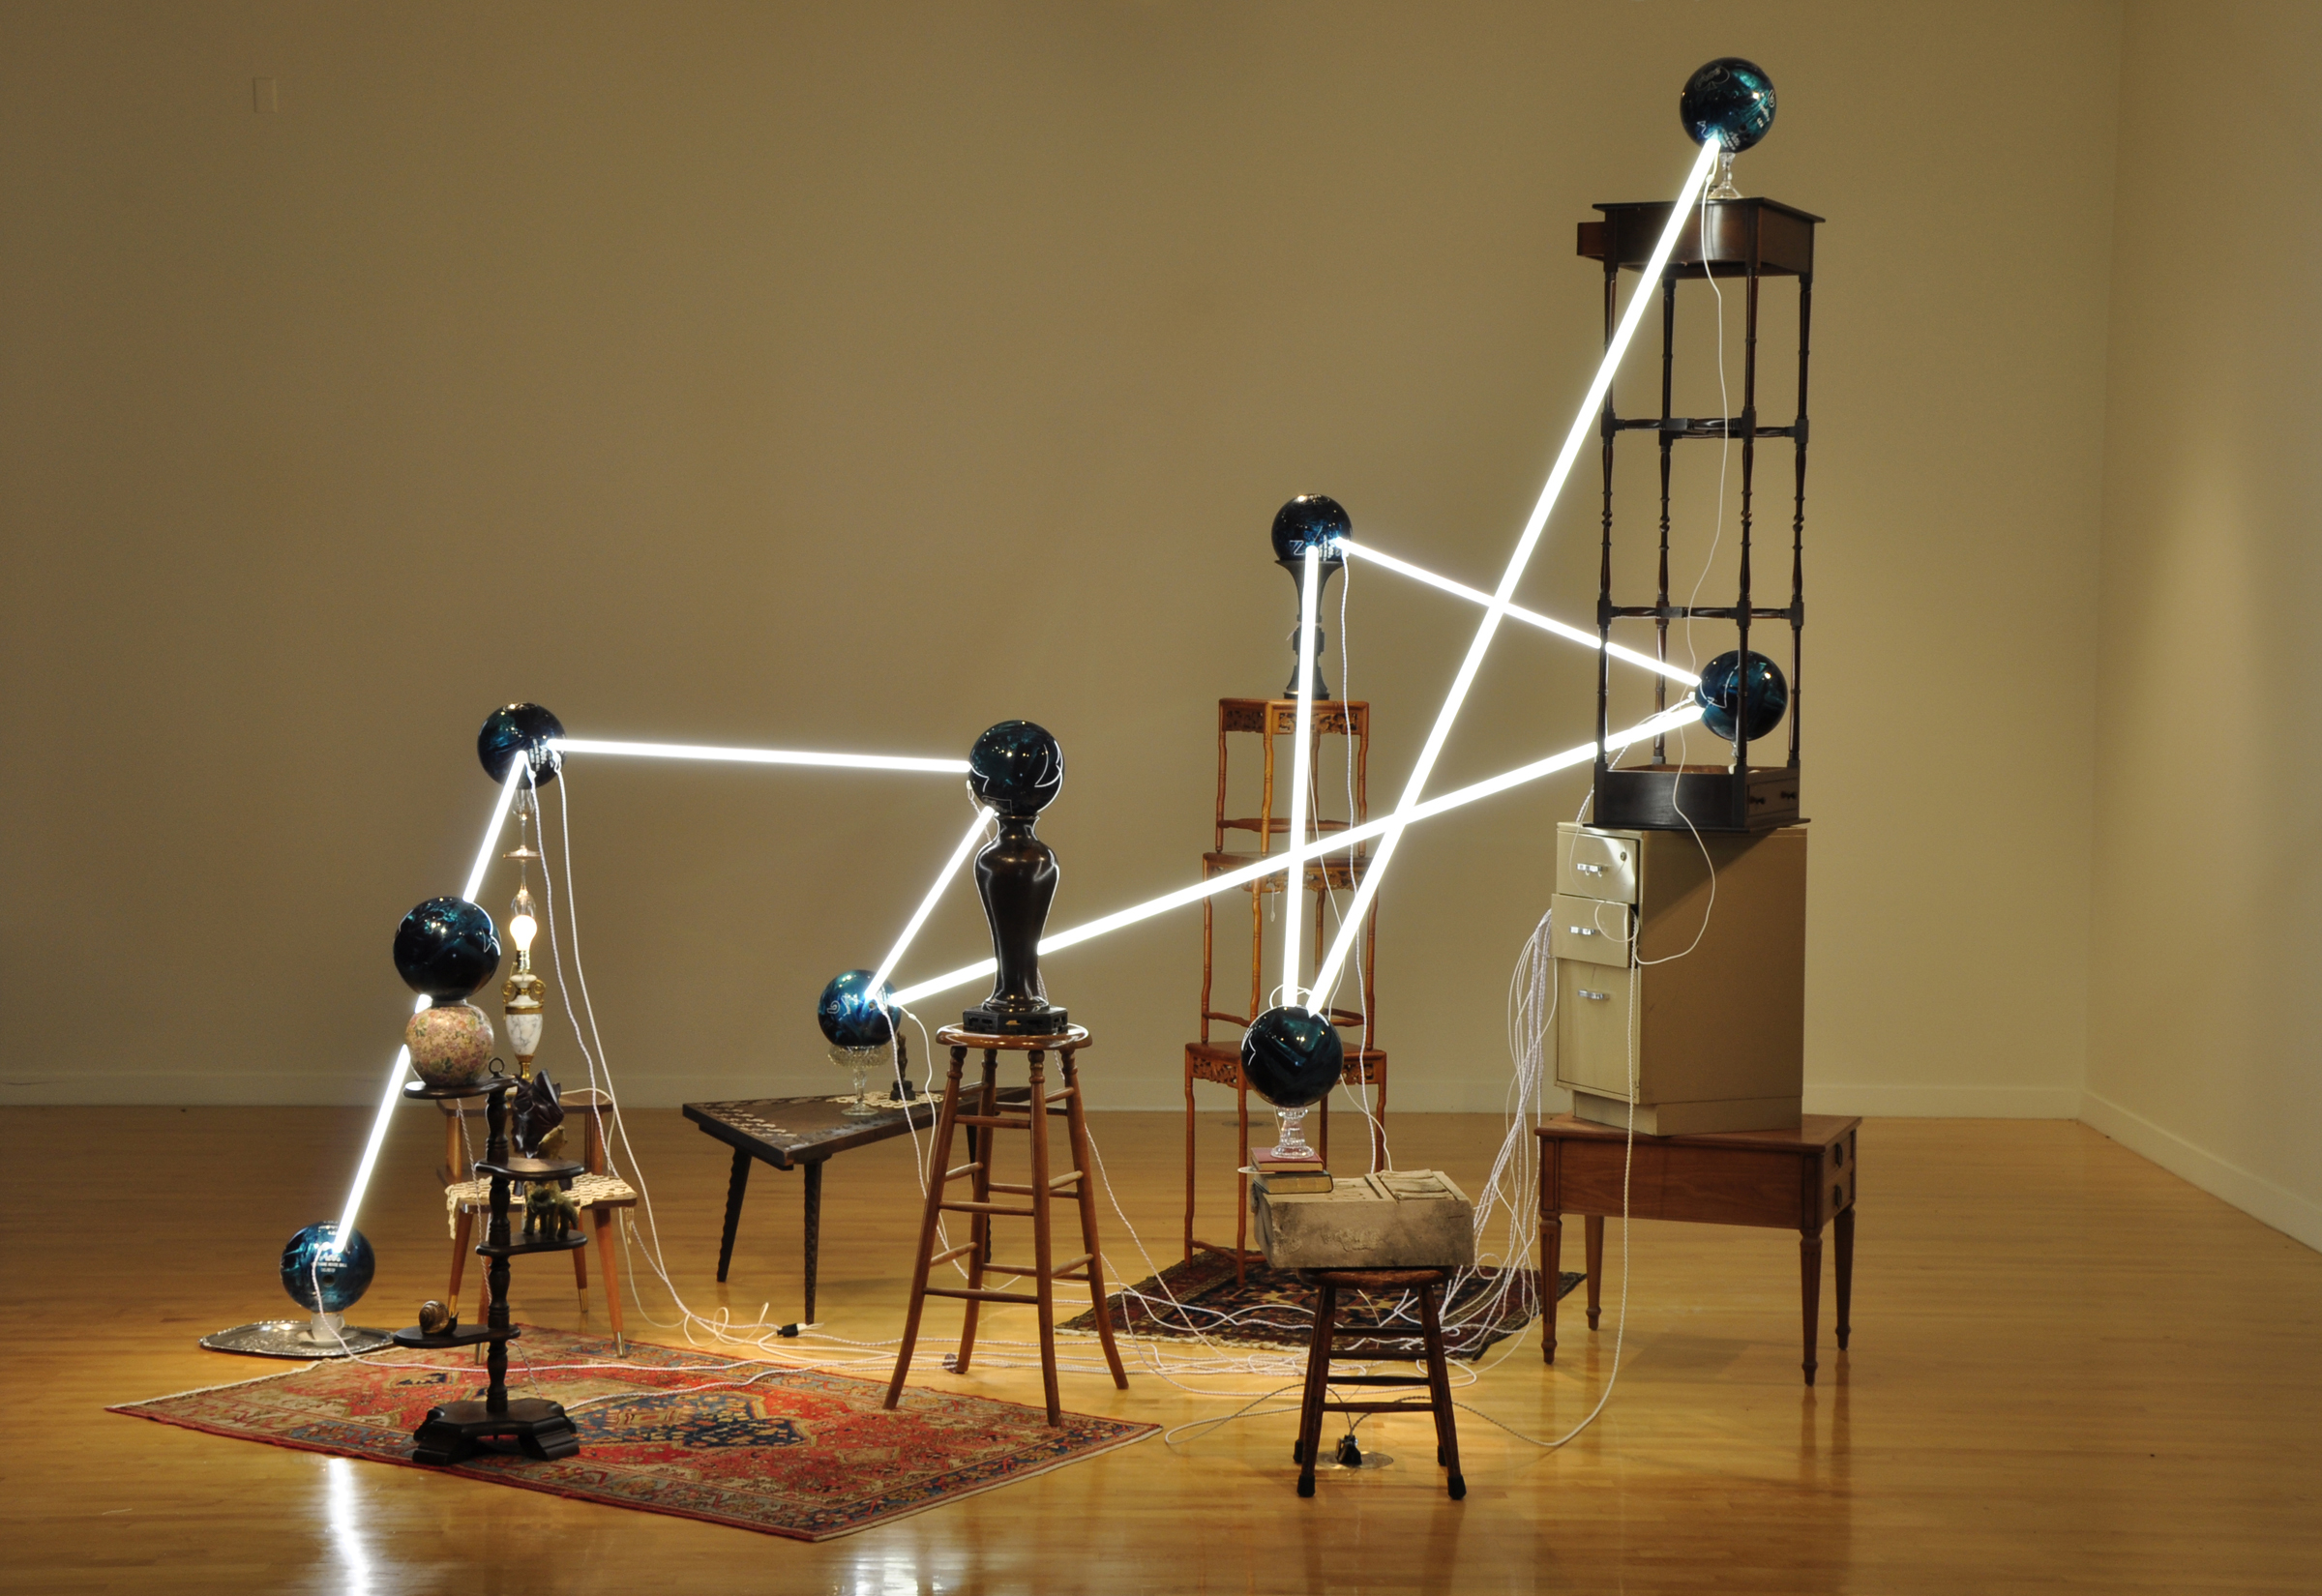   Alejandro Almanza Pereda © 2011 ,&nbsp;S pare the rod, spoil the child .&nbsp;Fluorescent light bulbs, bowling balls, lamp, books, tatted doilies, textiles, wood Polynesian bust, electric cords, glassware, ceramics, wood side and coffee tables, met